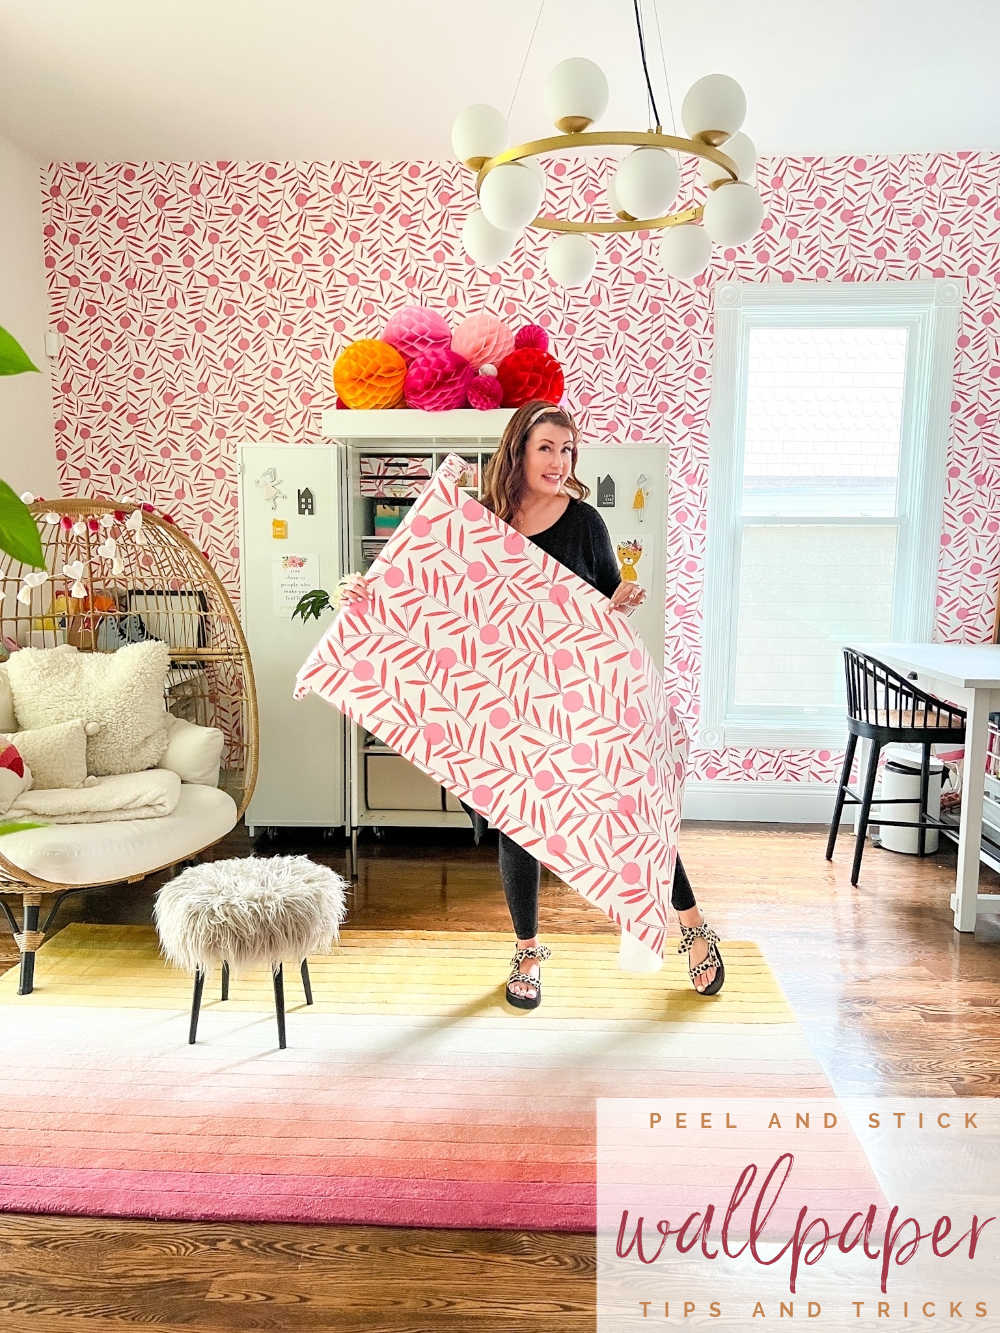 How to Hang Peel and Stick Wallpaper - my favorite tips and tricks!